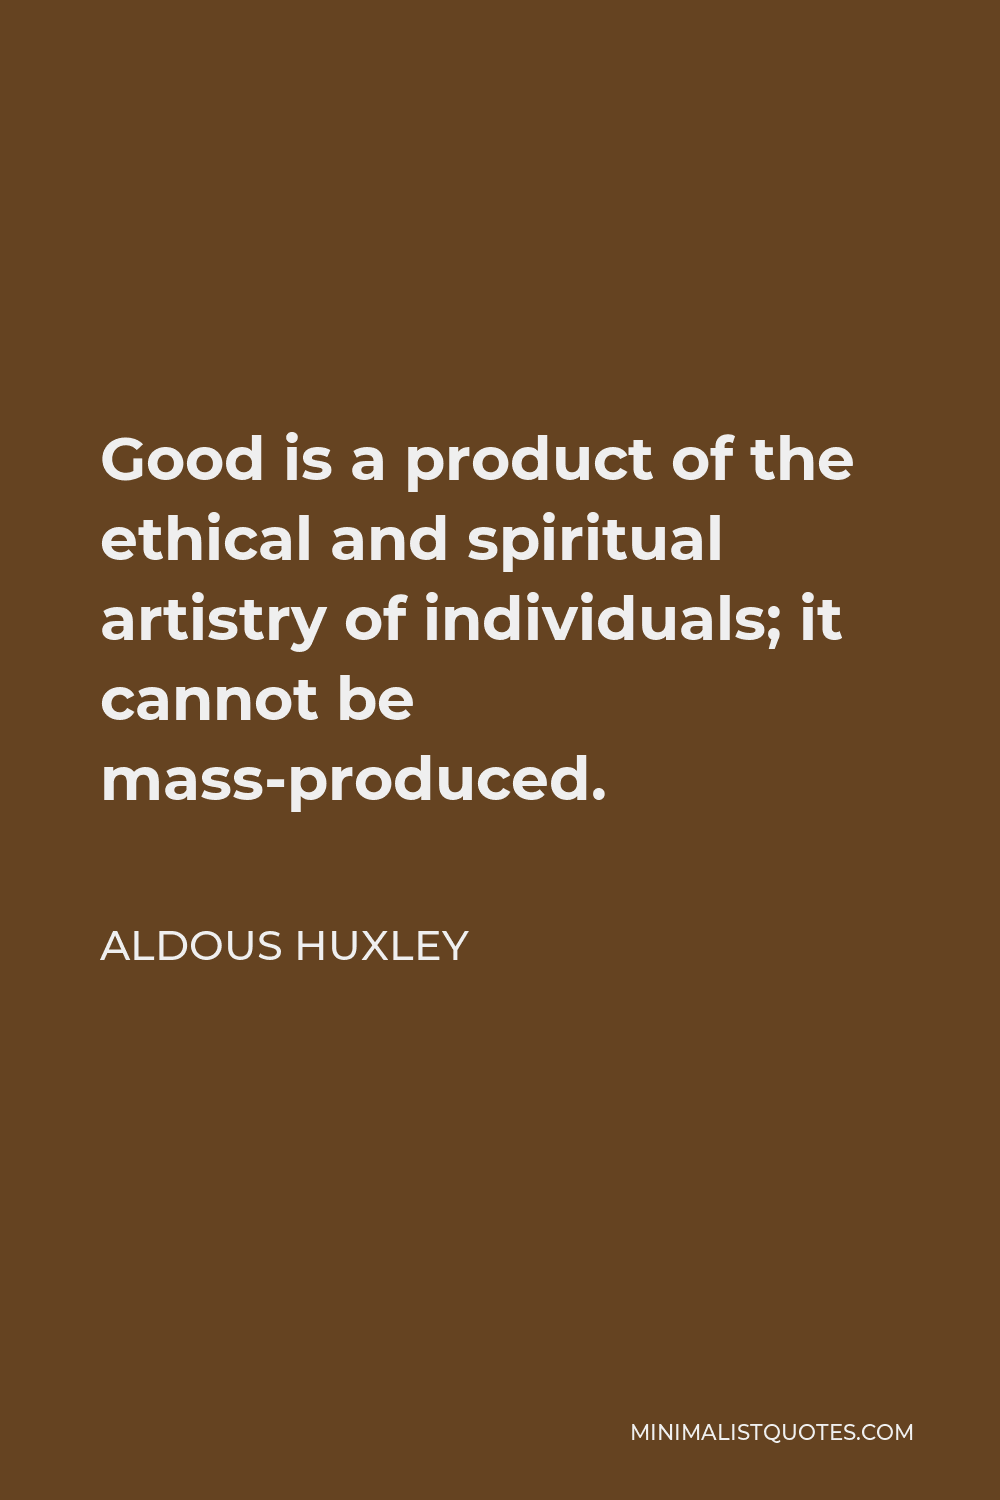 Aldous Huxley Quote - Good is a product of the ethical and spiritual artistry of individuals; it cannot be mass-produced.